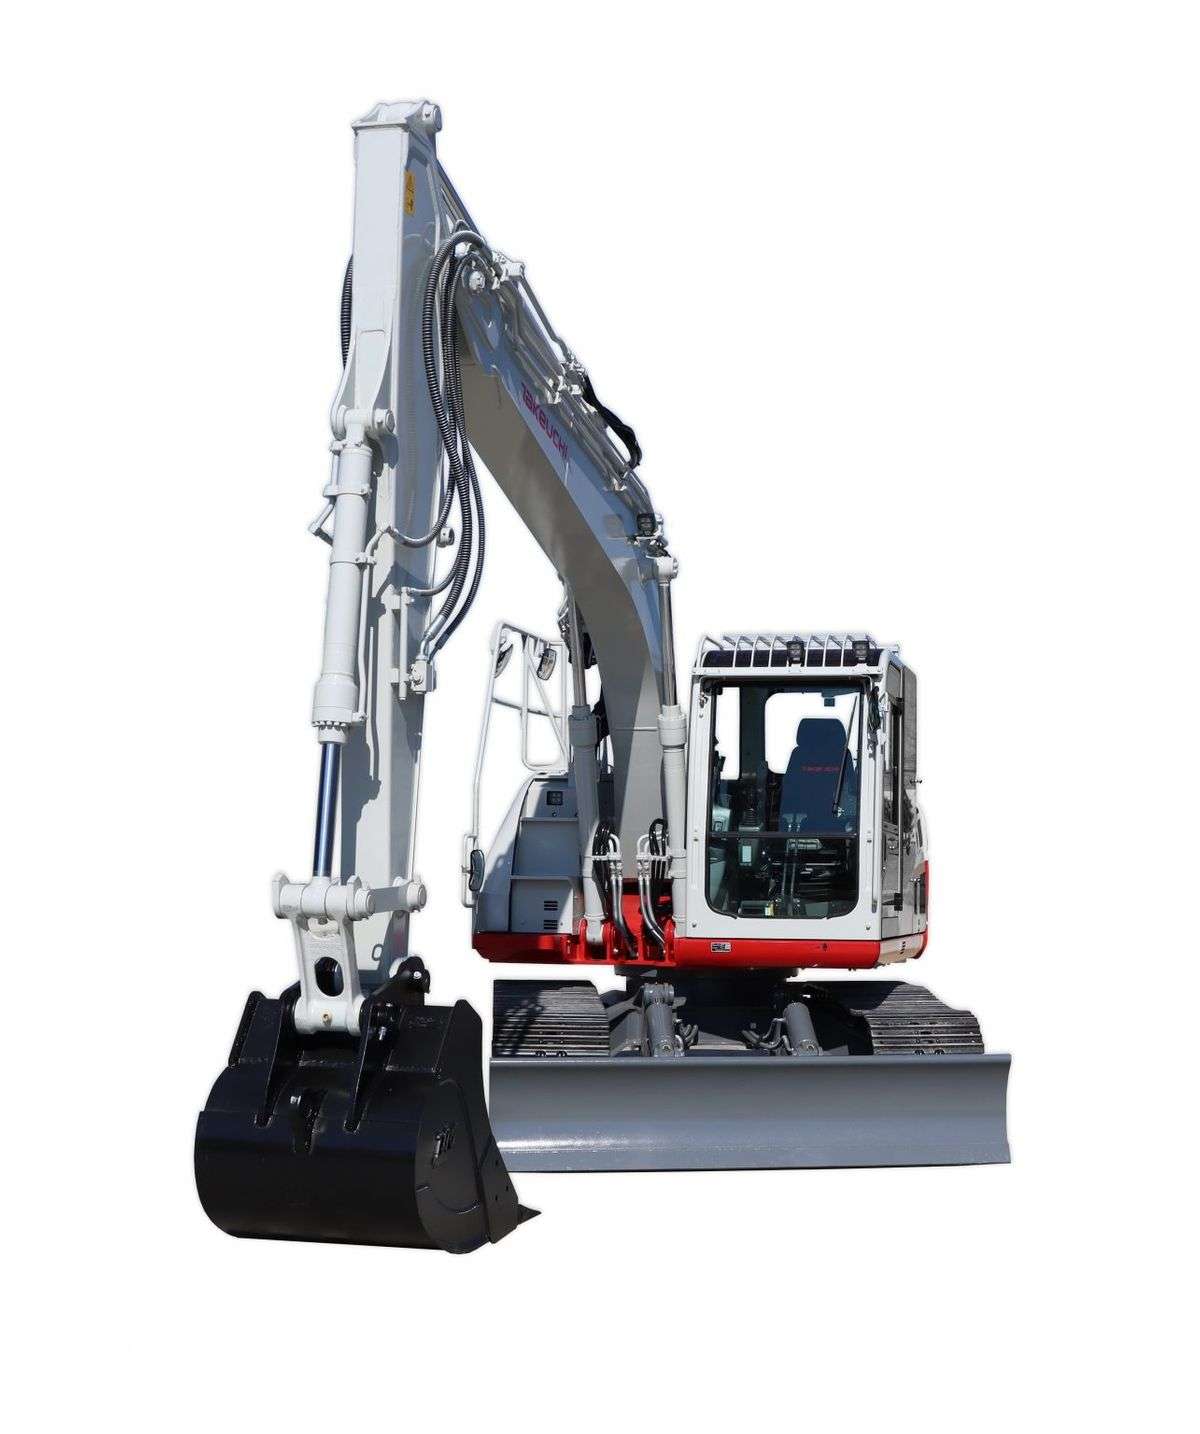 Takeuchi Bolsters Excavator Offering With New 15-Tonne Model